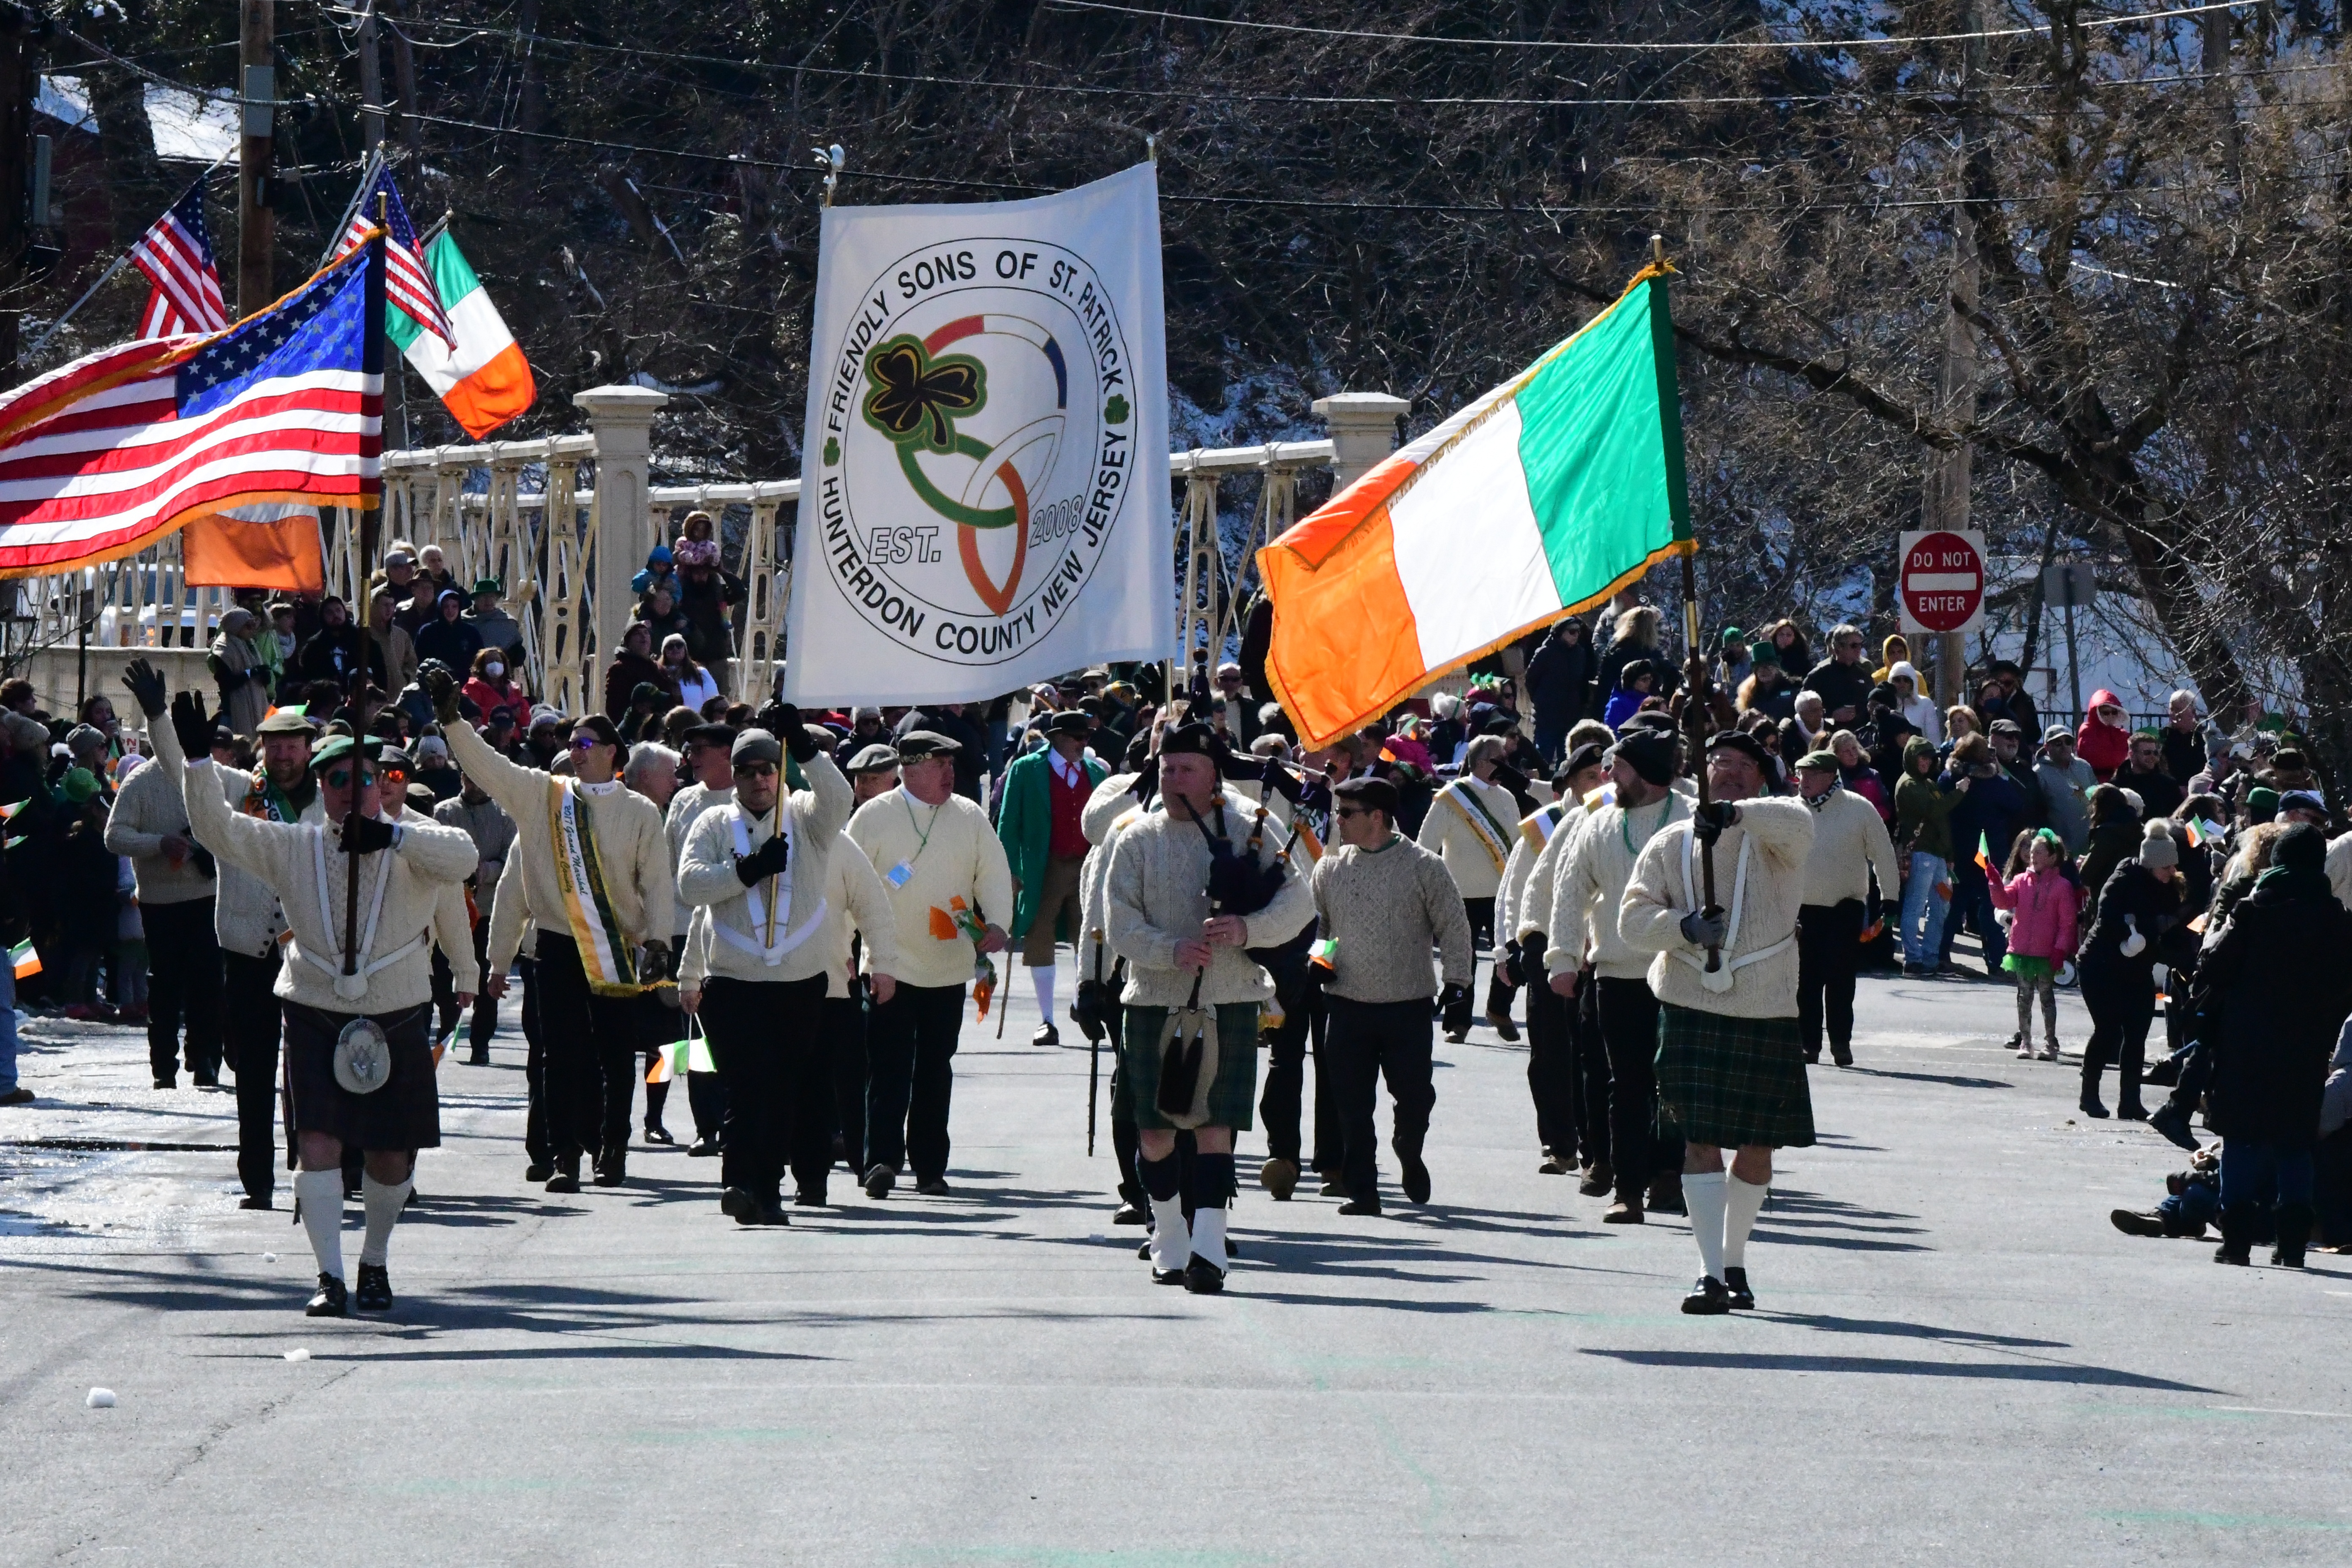 The 2022 St Patrick's Day Parade hosted by the Friendly Sons of St Patrick Hunterdon County took place in Clinton on March 13 , 2022

The Friendly Sons of St Patrick Hunterdon County